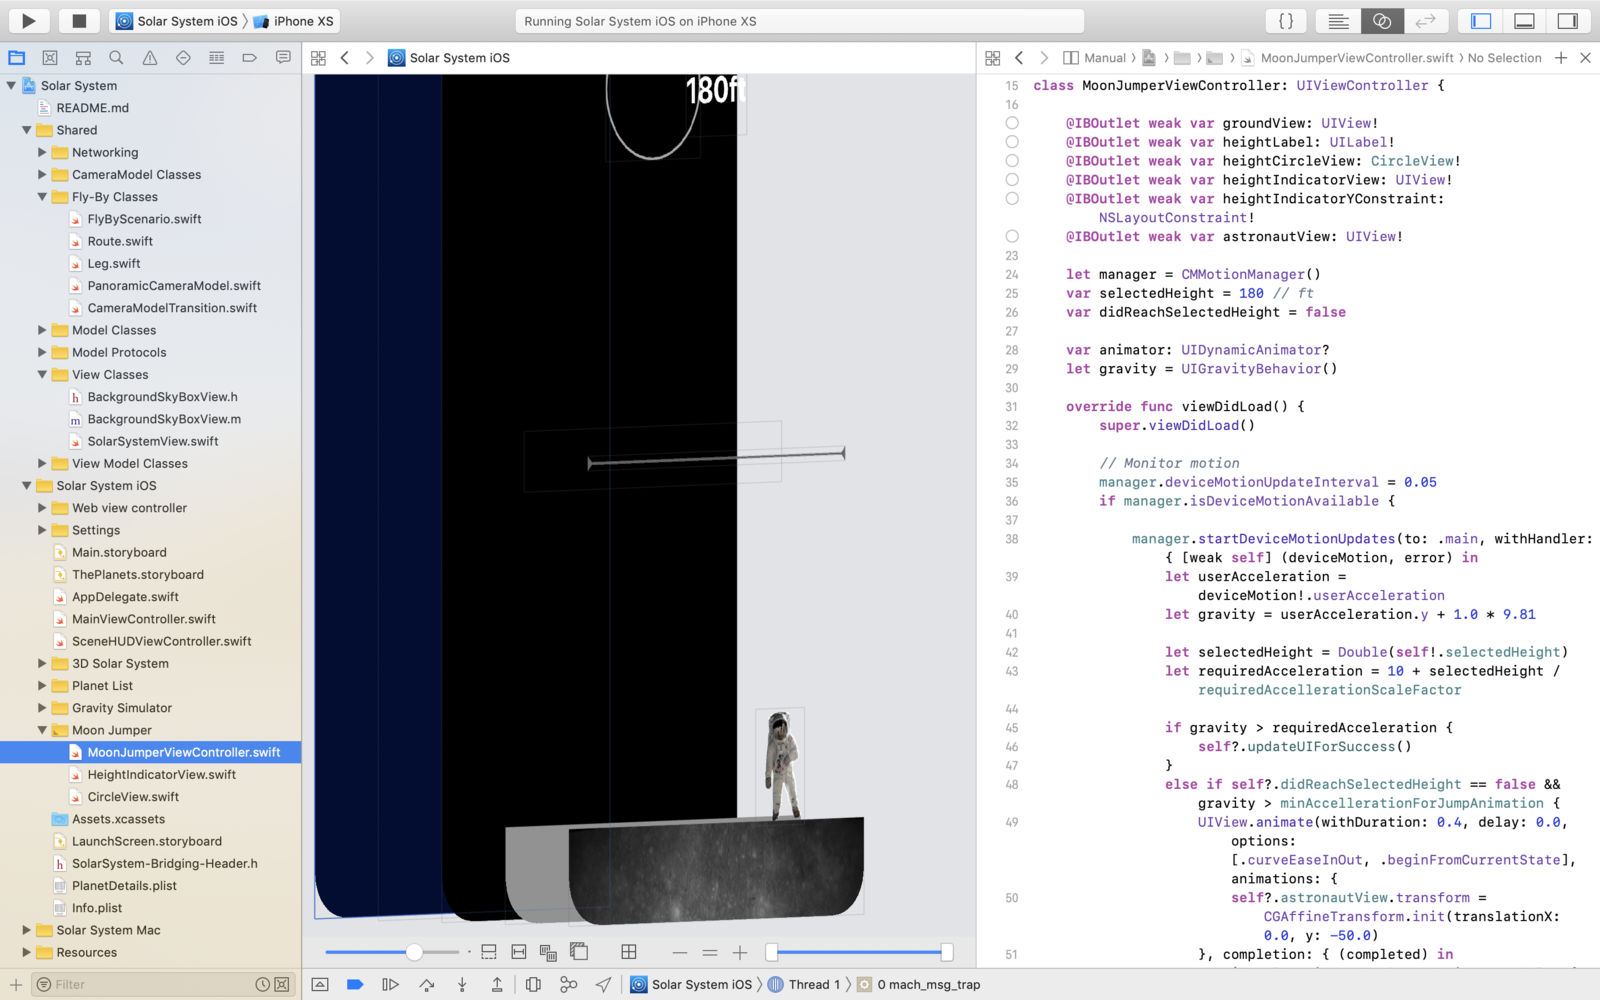 xcode for mac 10.7